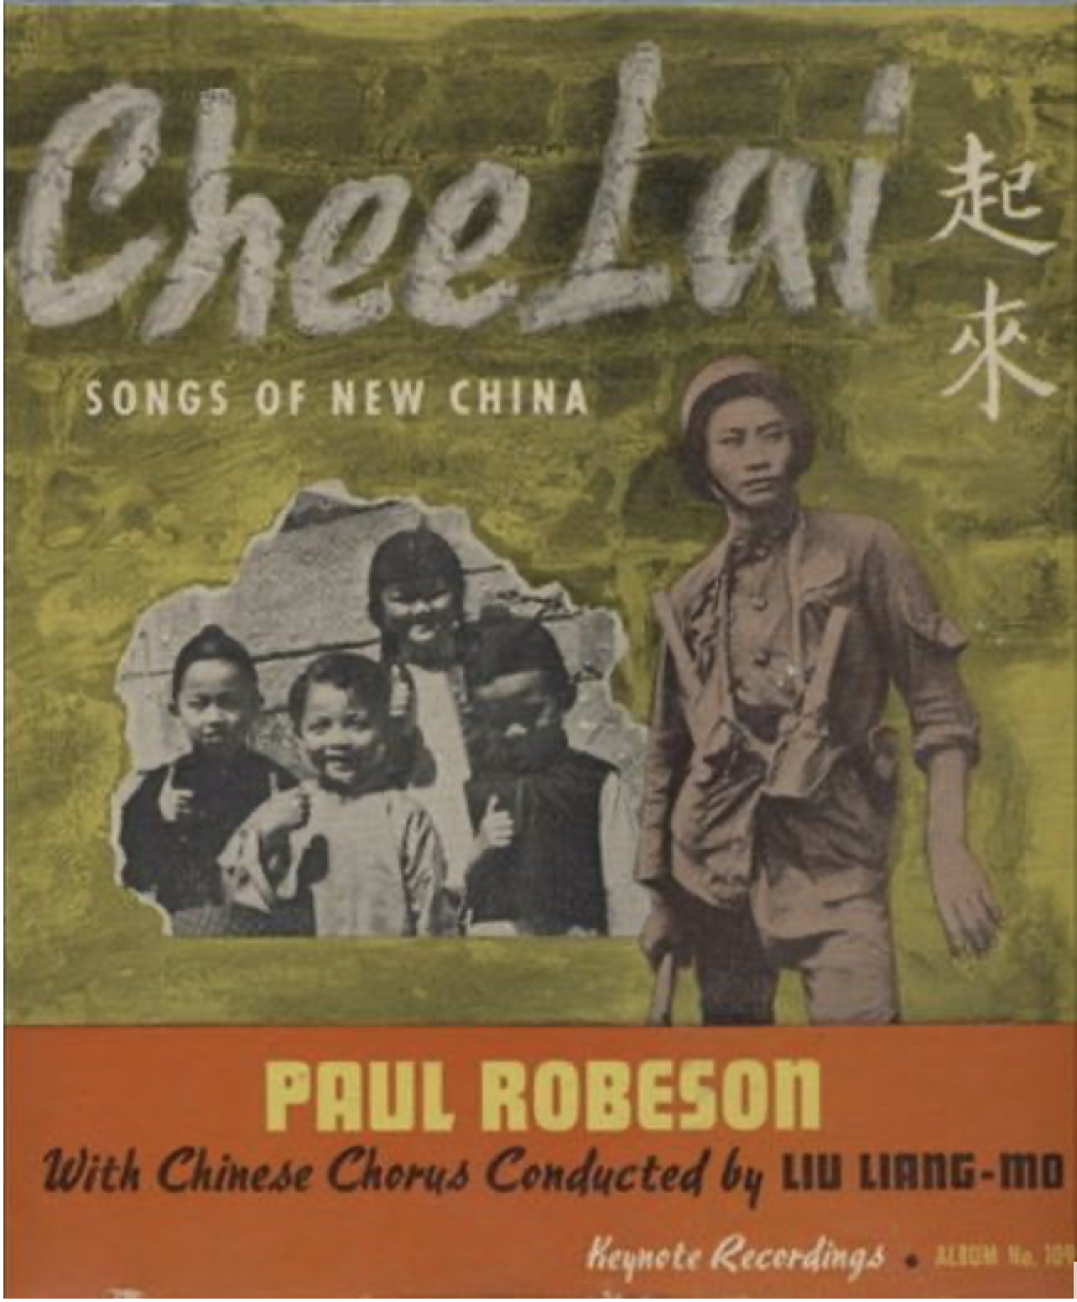 Cover of a 1941 album in which Paul Robeson, a renowned African-American singer, sings “March of the Volunteers” in both Chinese and English.